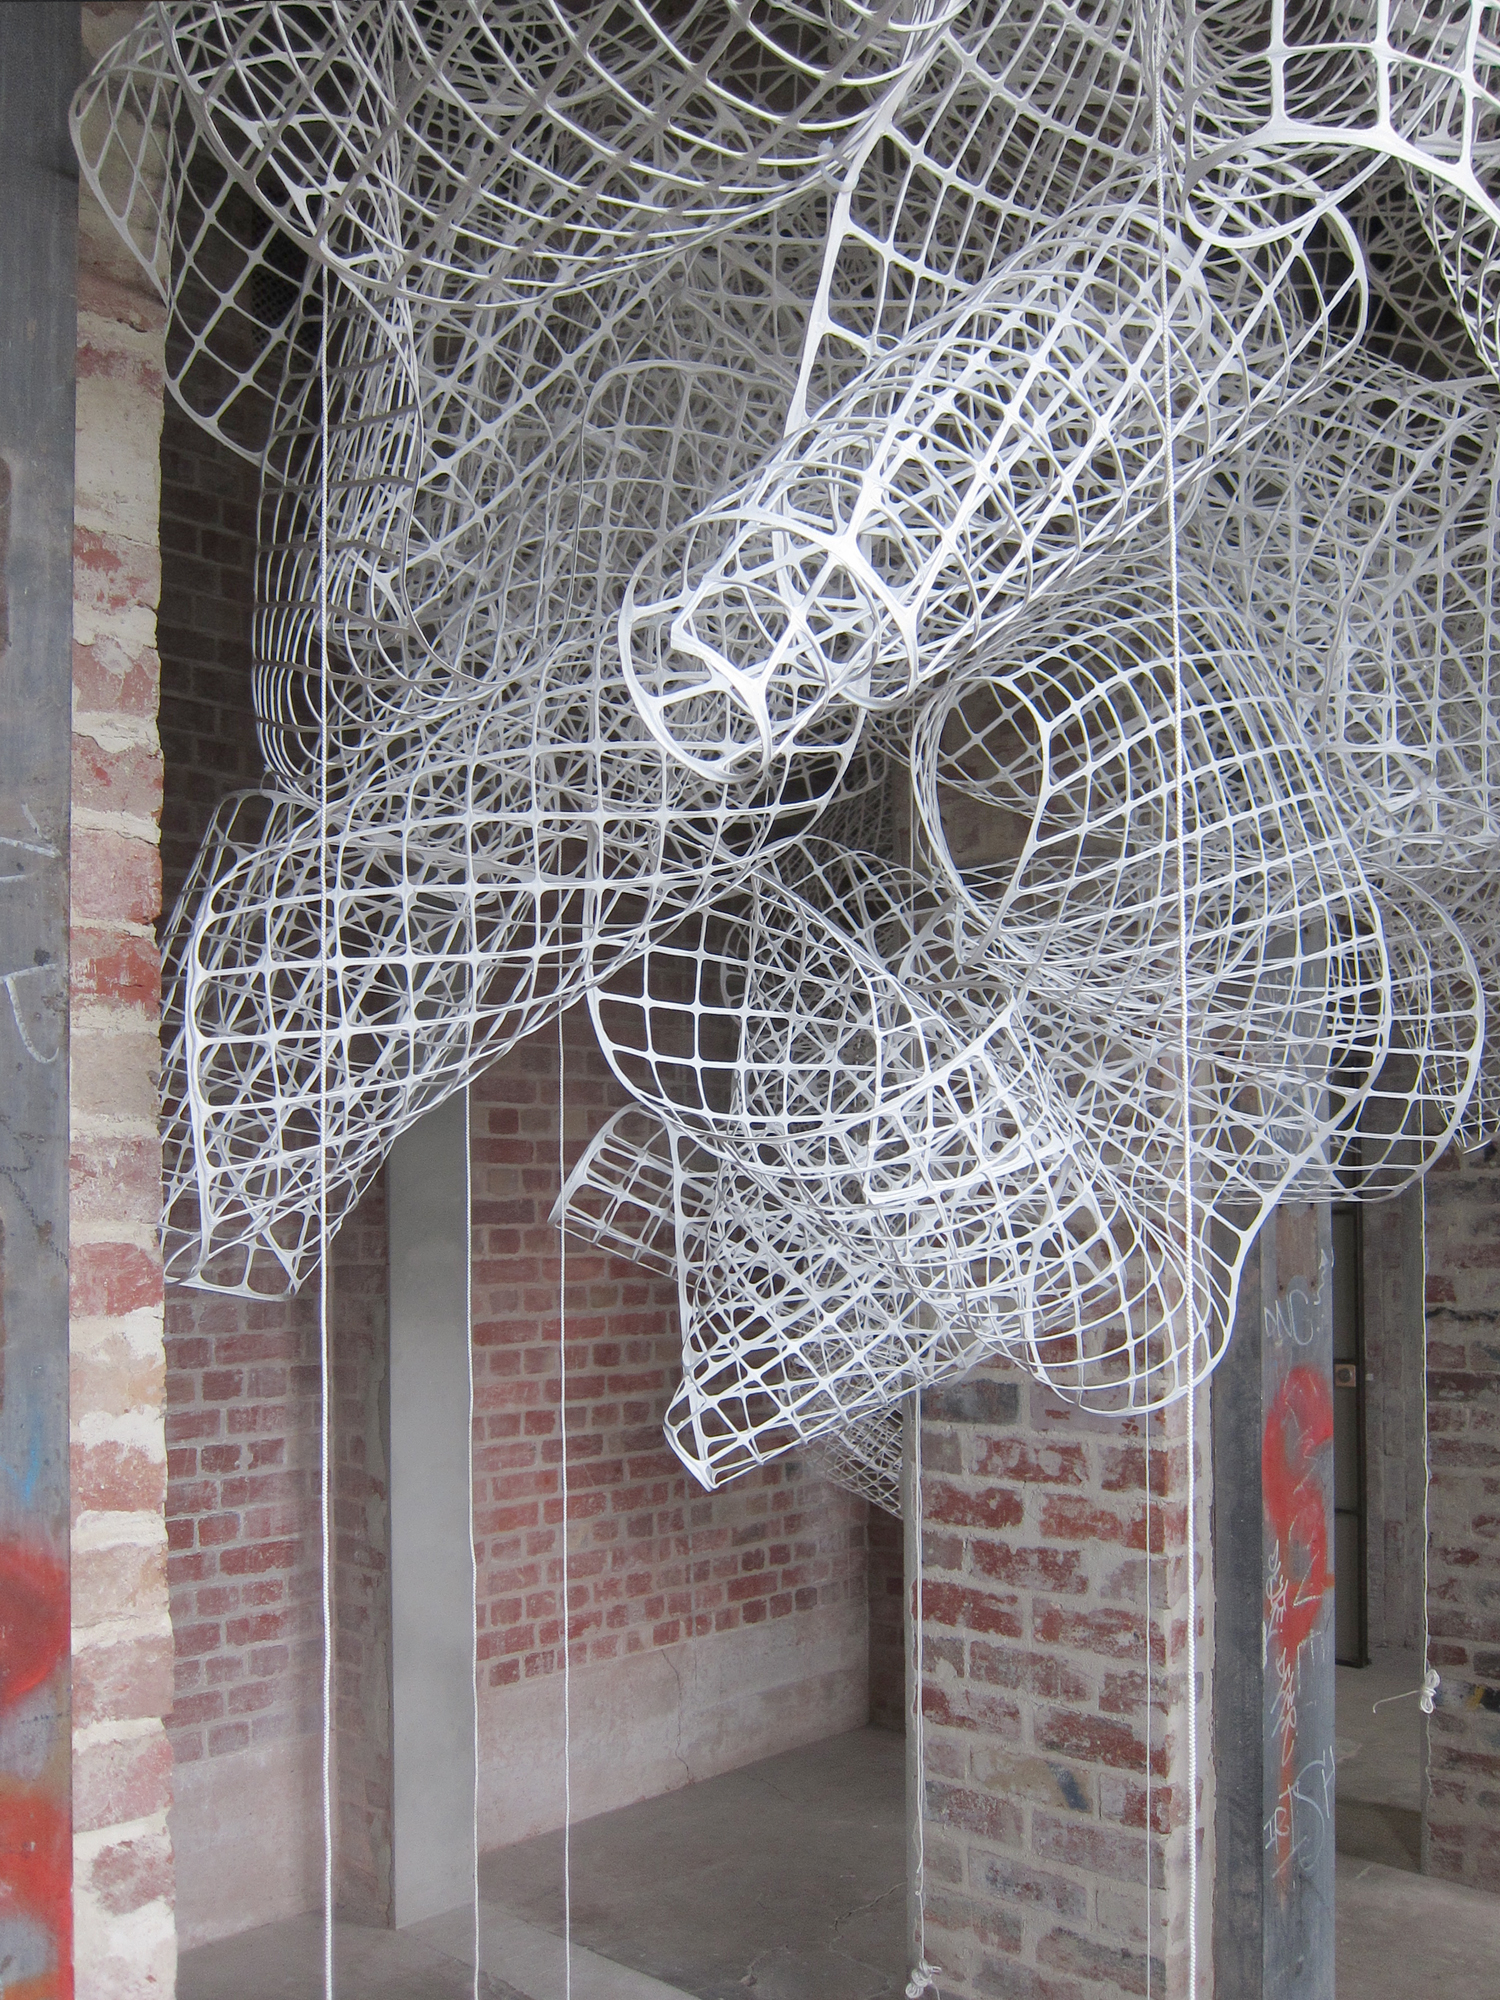   Runnel,  2011. Detail. Finalist in Substation Contemporary Art Prize.  Plastic trellis, rope, light. Dimensions variable. 